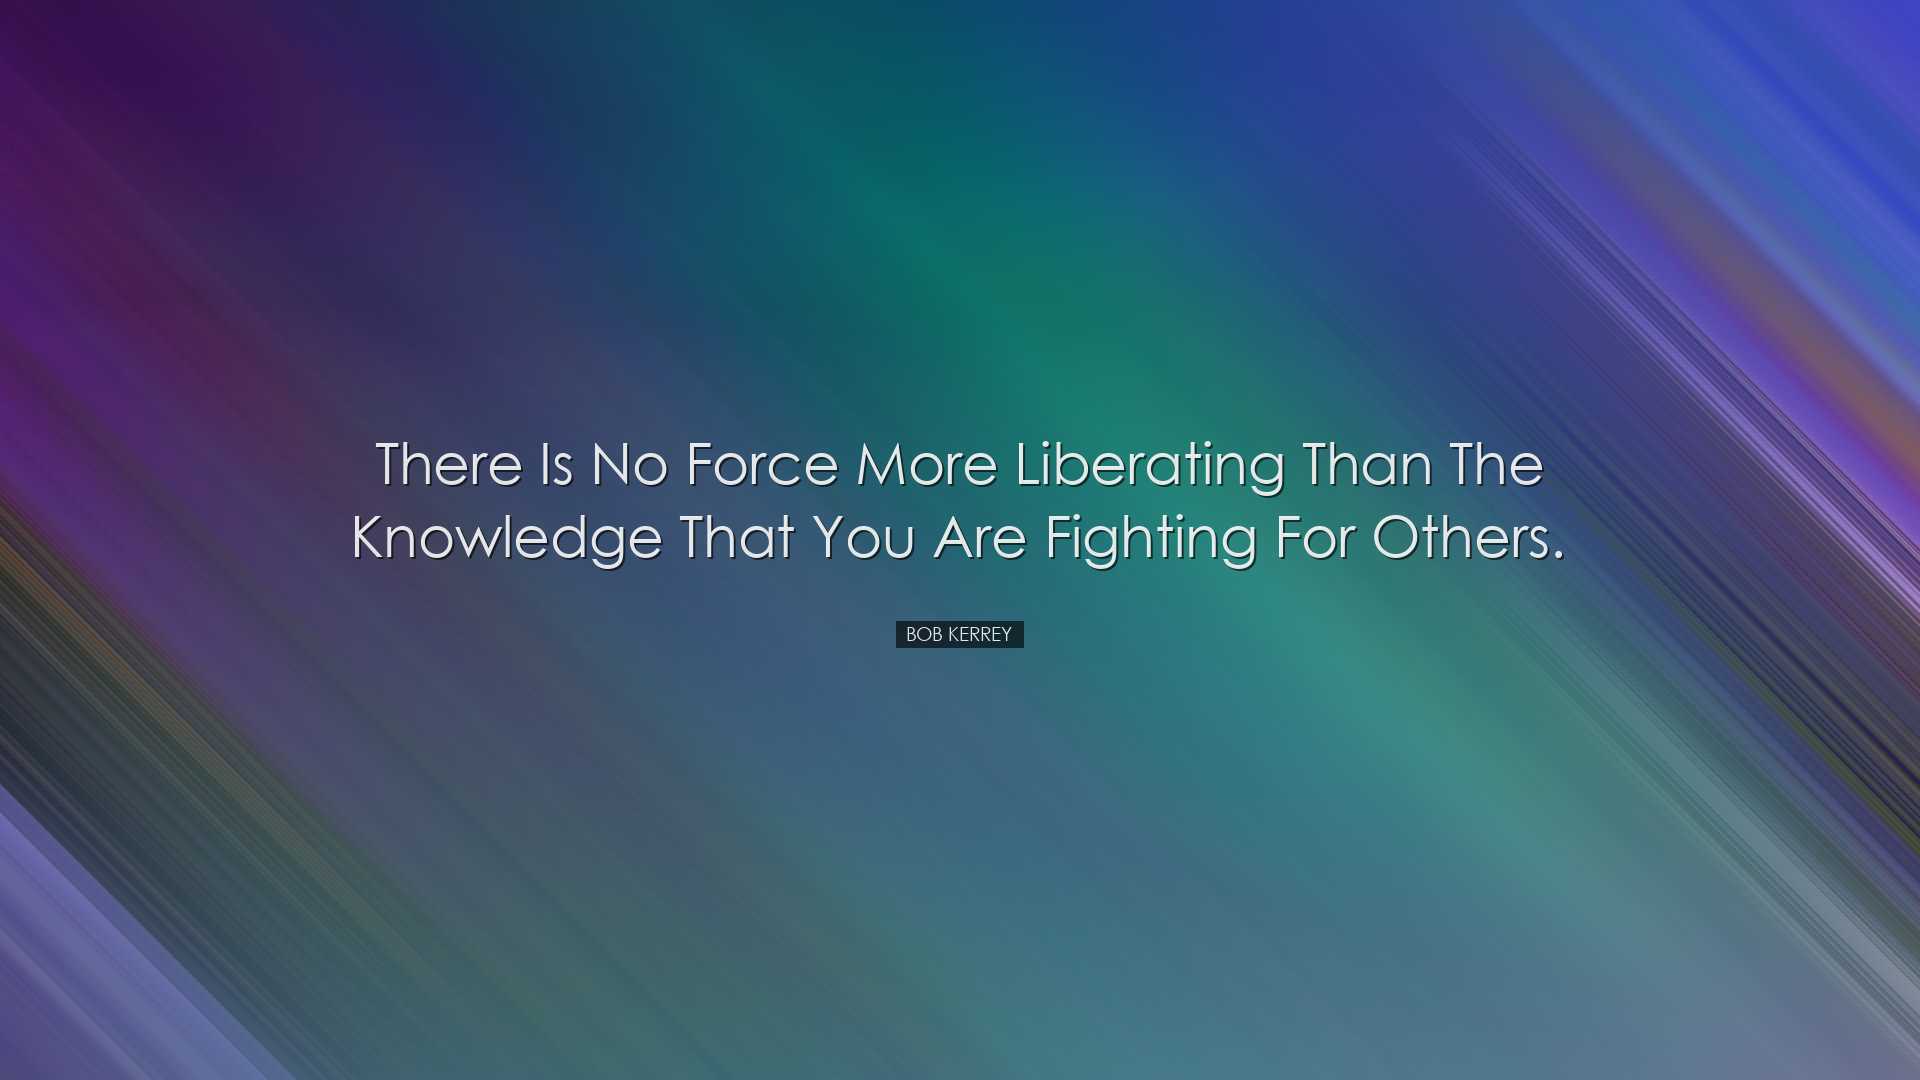 There is no force more liberating than the knowledge that you are